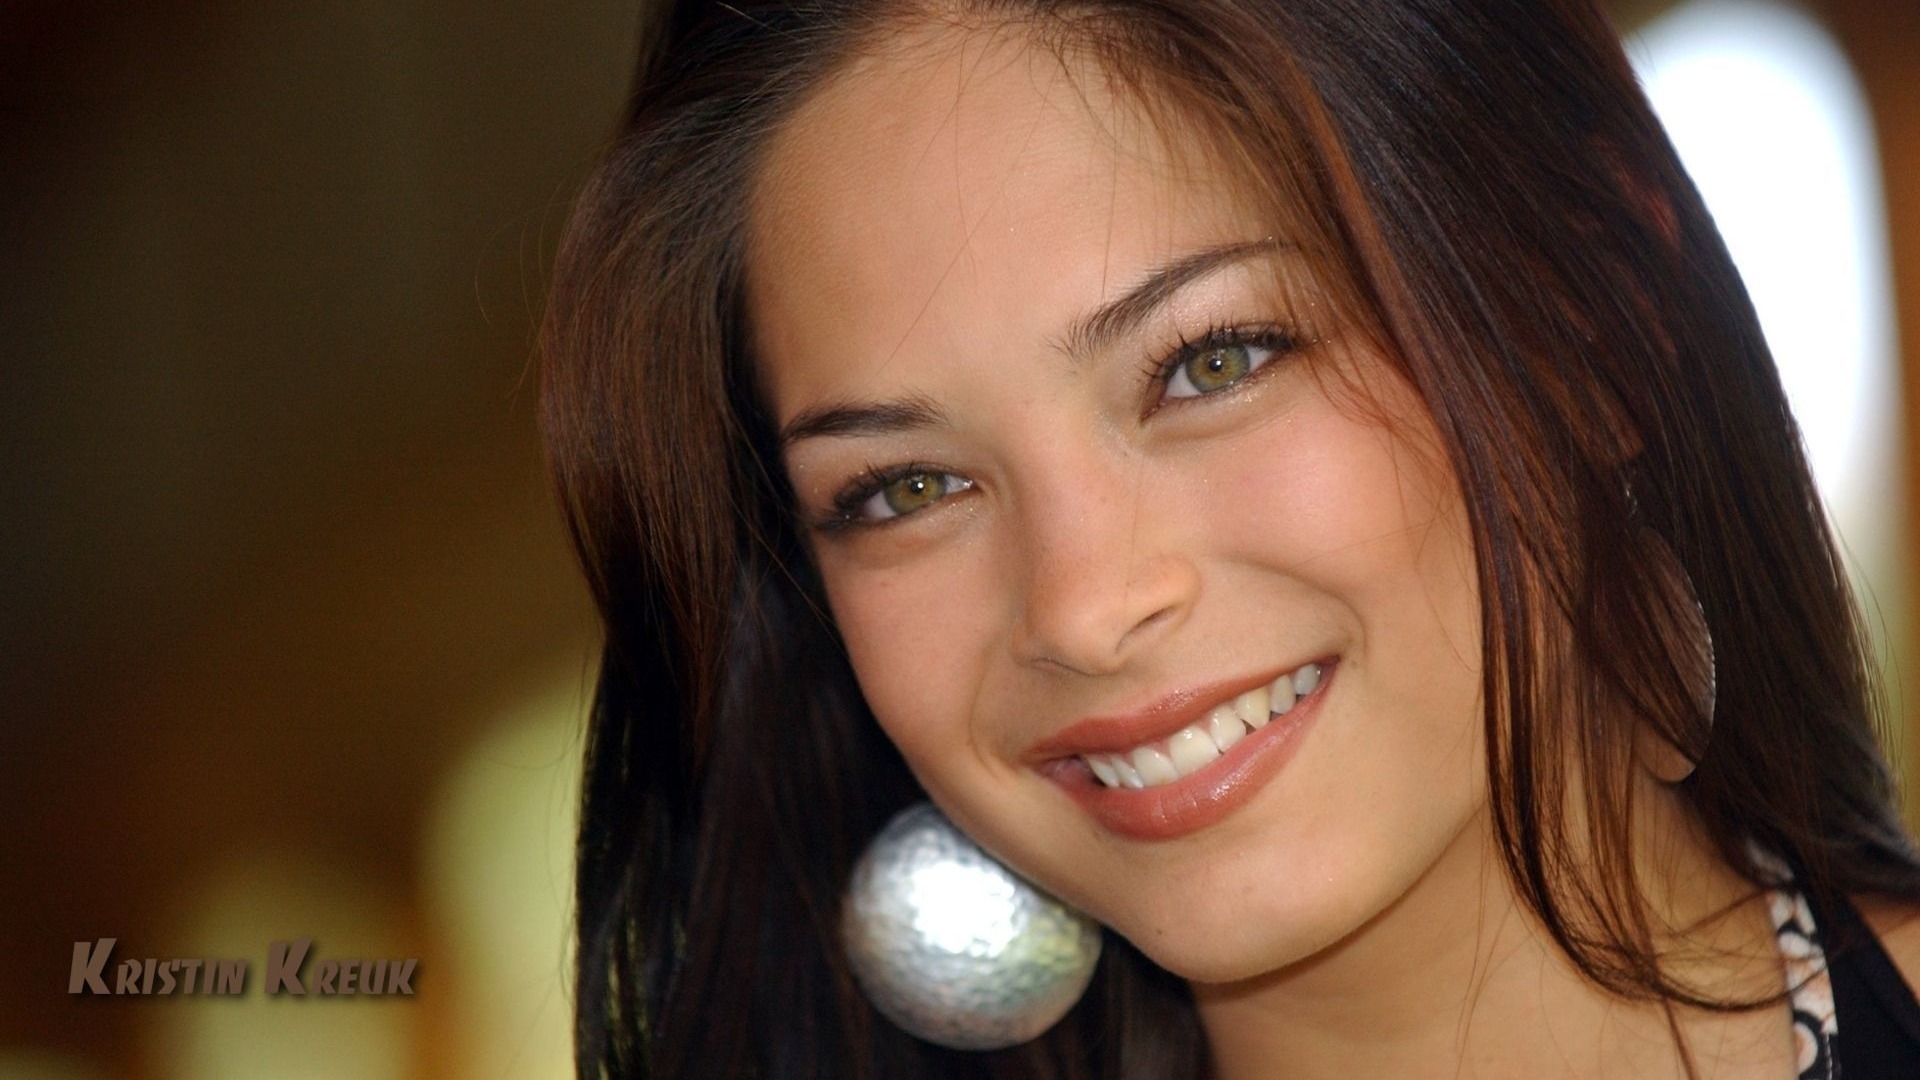 Kristin Kreuk #008 - 1920x1080 Wallpapers Pictures Photos Images